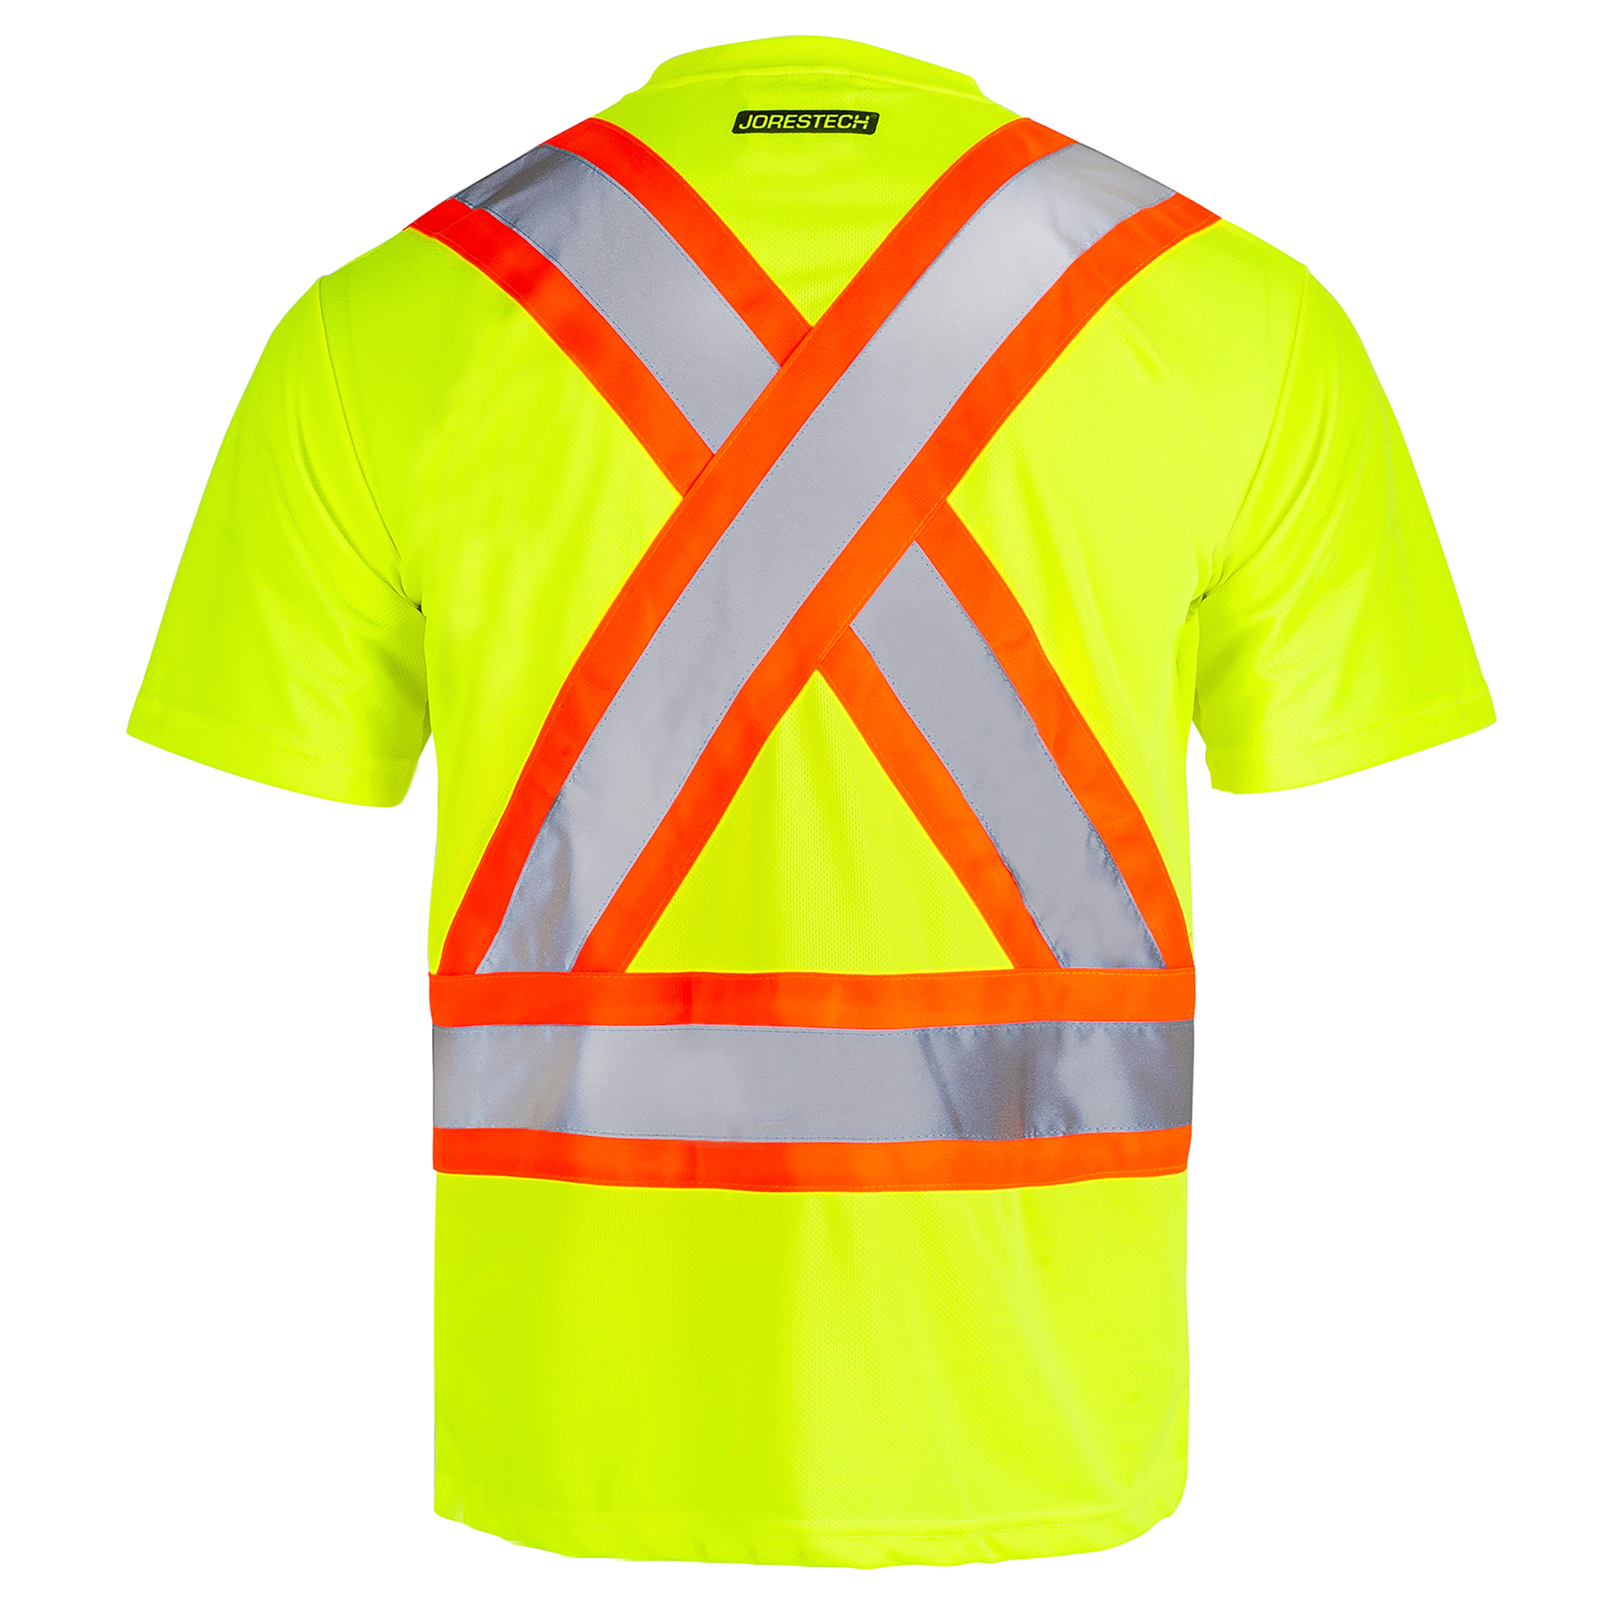 Back view of a Hi-vis reflective two tone safety yellow orange pocket shirt . ANSI and CSA Compliant